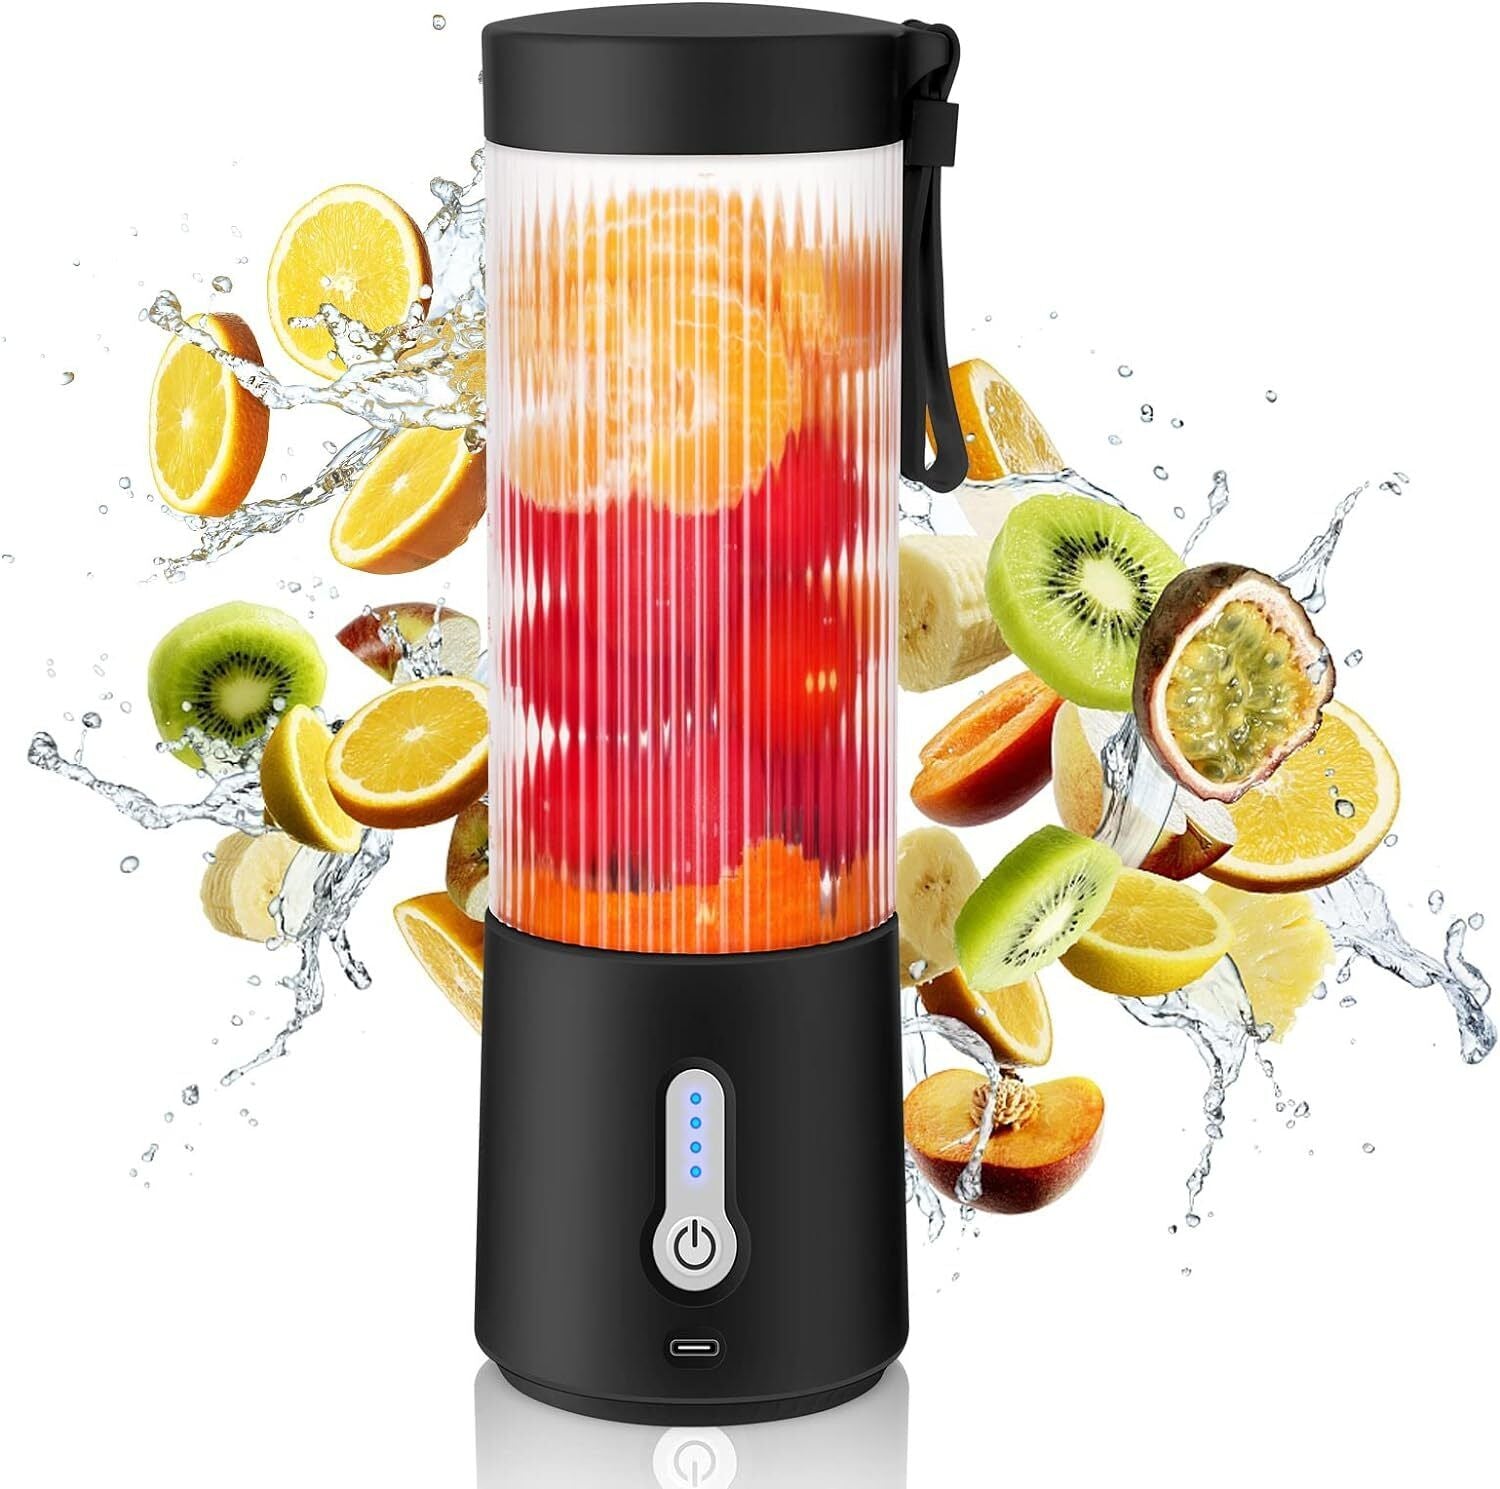 450Ml Portable Blender Juicer Cup, Bpa-Free USB Rechargeable Fruit Smoothie Mixer